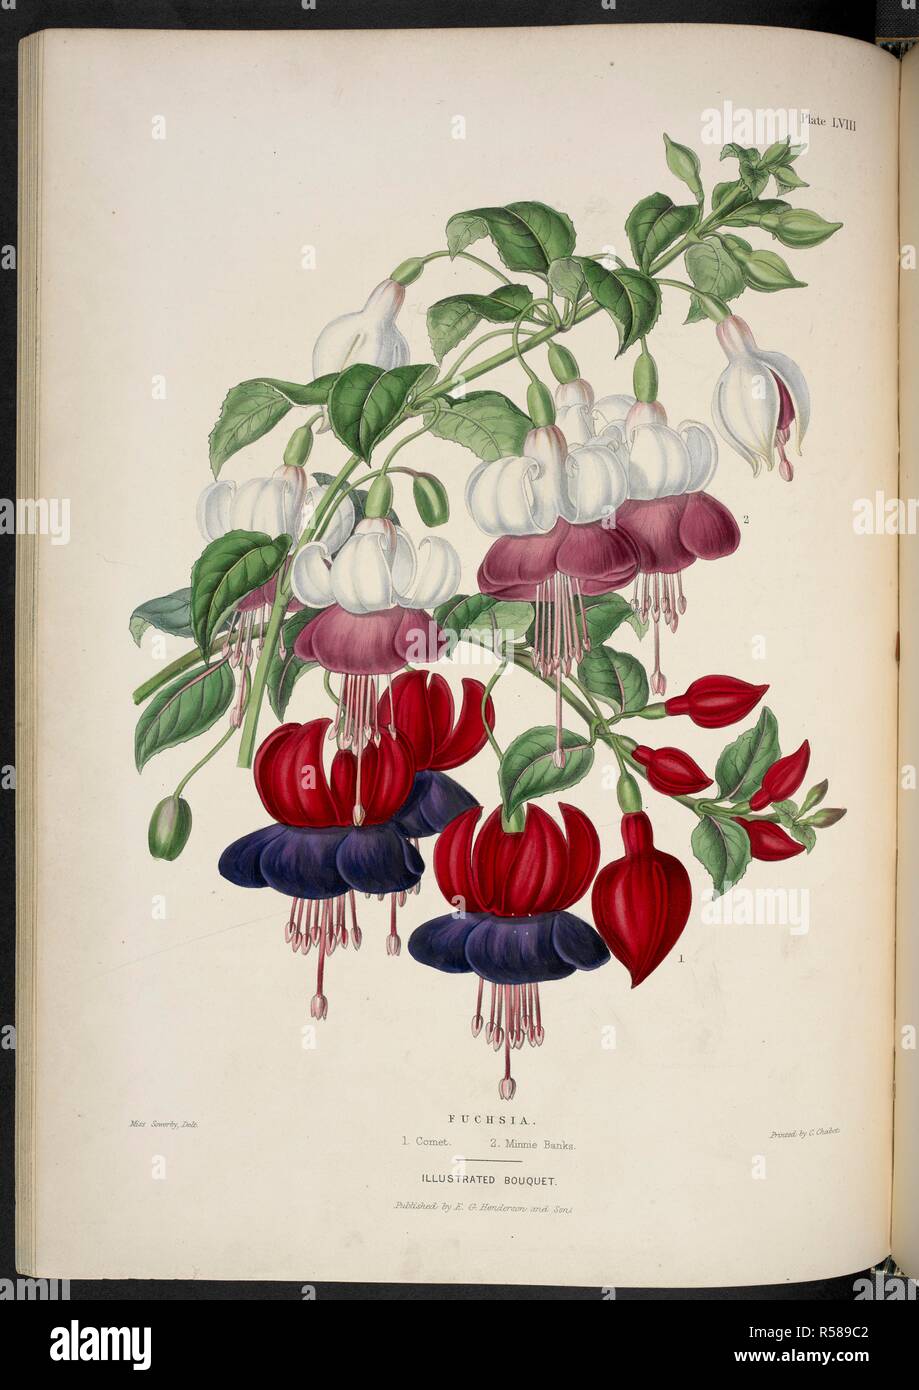 New fuchsias. Fuchsia. 1. Comet; 2. Minnie Banks. The Illustrated Bouquet, consisting of figures, with descriptions of new flowers. London, 1857-64. Source: 1823.c.13 plate 58. Author: Henderson, Edward George. Sowerby, Miss. Stock Photo